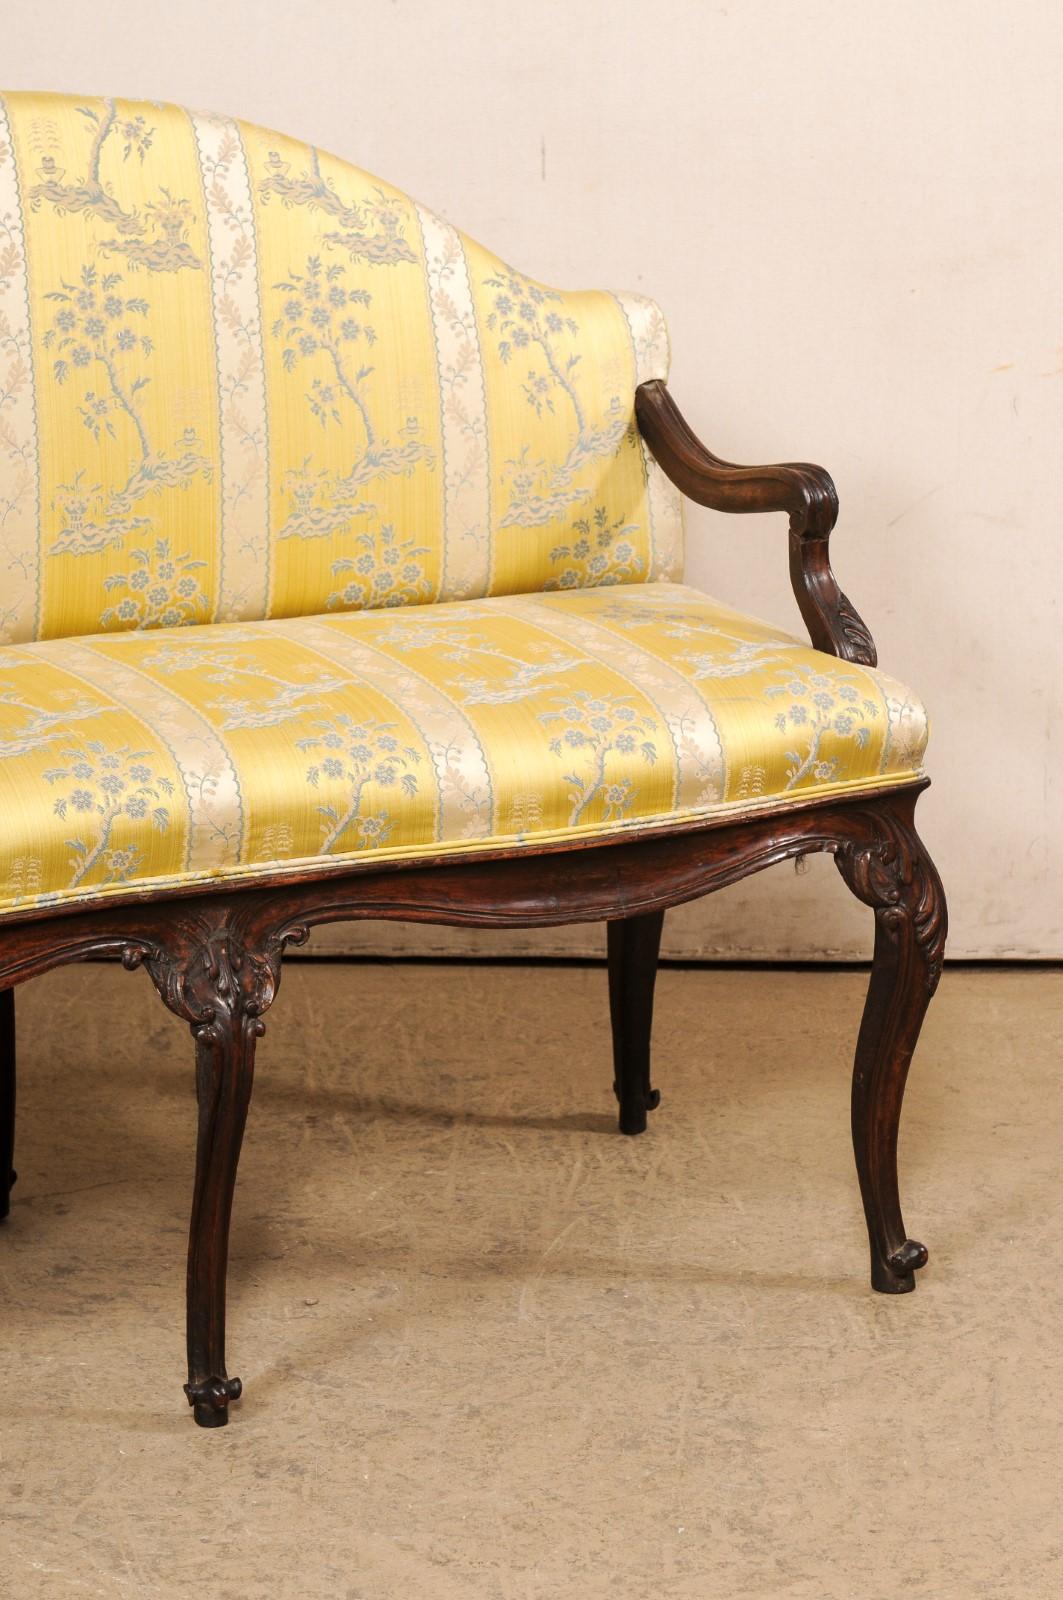 Upholstery An Italian Carved-Wood & Upholstered Settee, Turn of 18th/19th Century For Sale